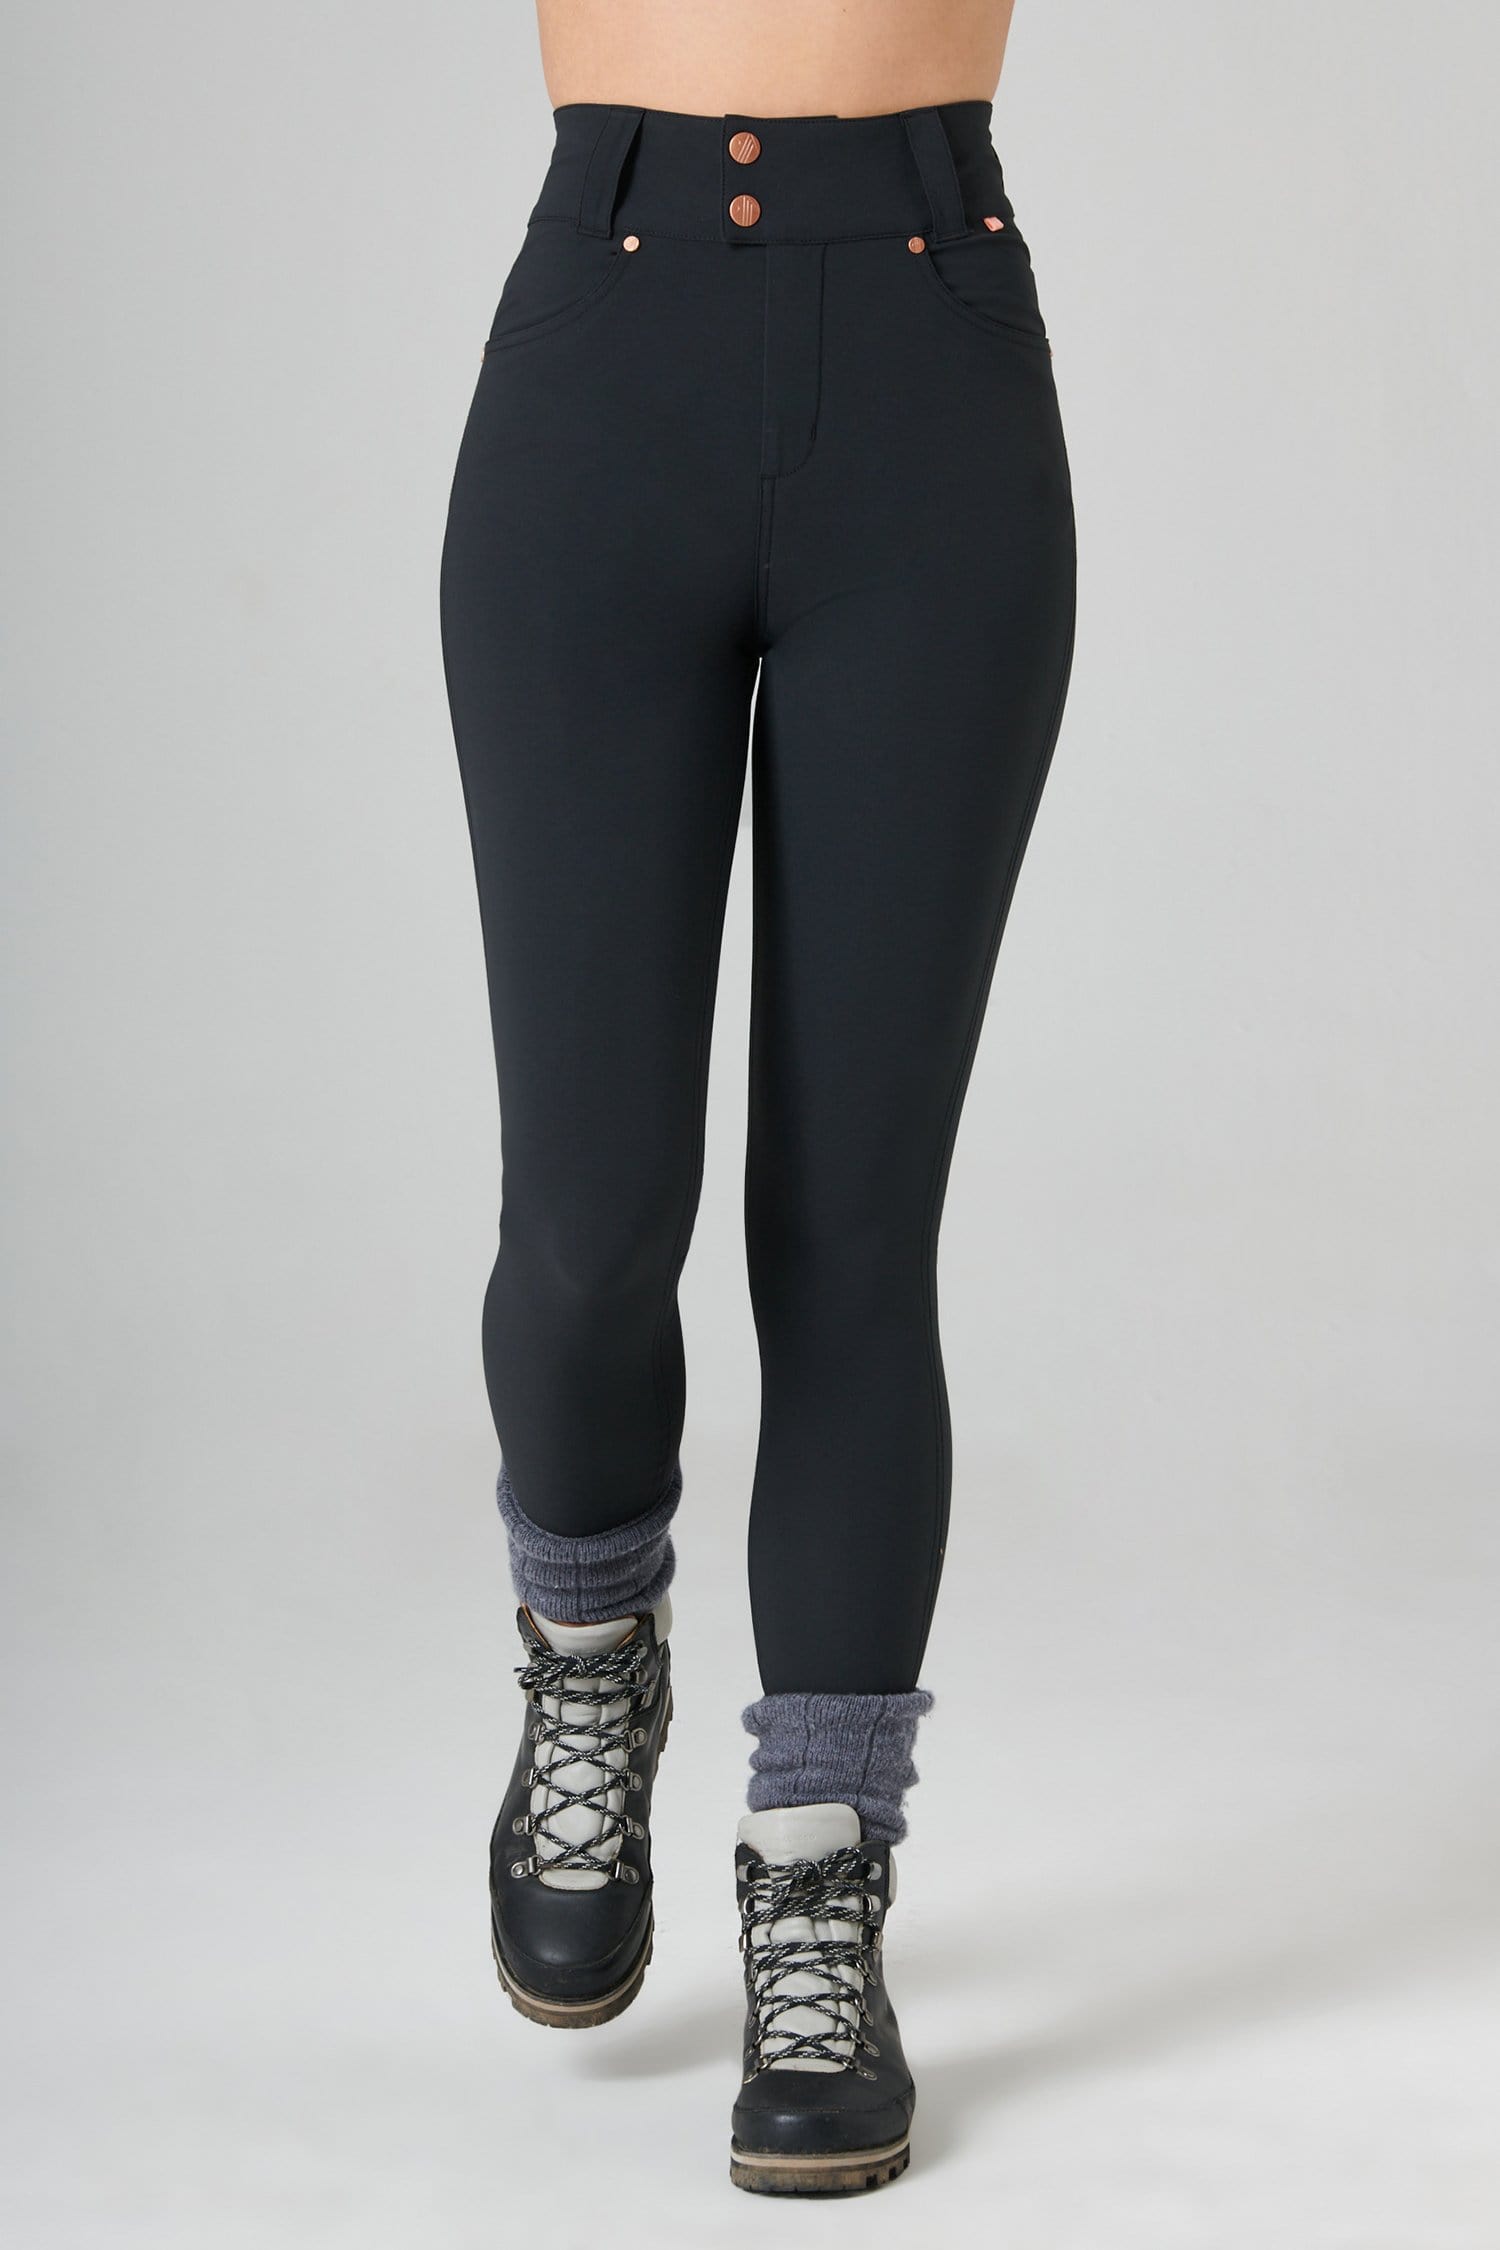 The Shape Skinny Outdoor Trousers - Black - 26r / Uk8 - Womens - Acai Outdoorwear